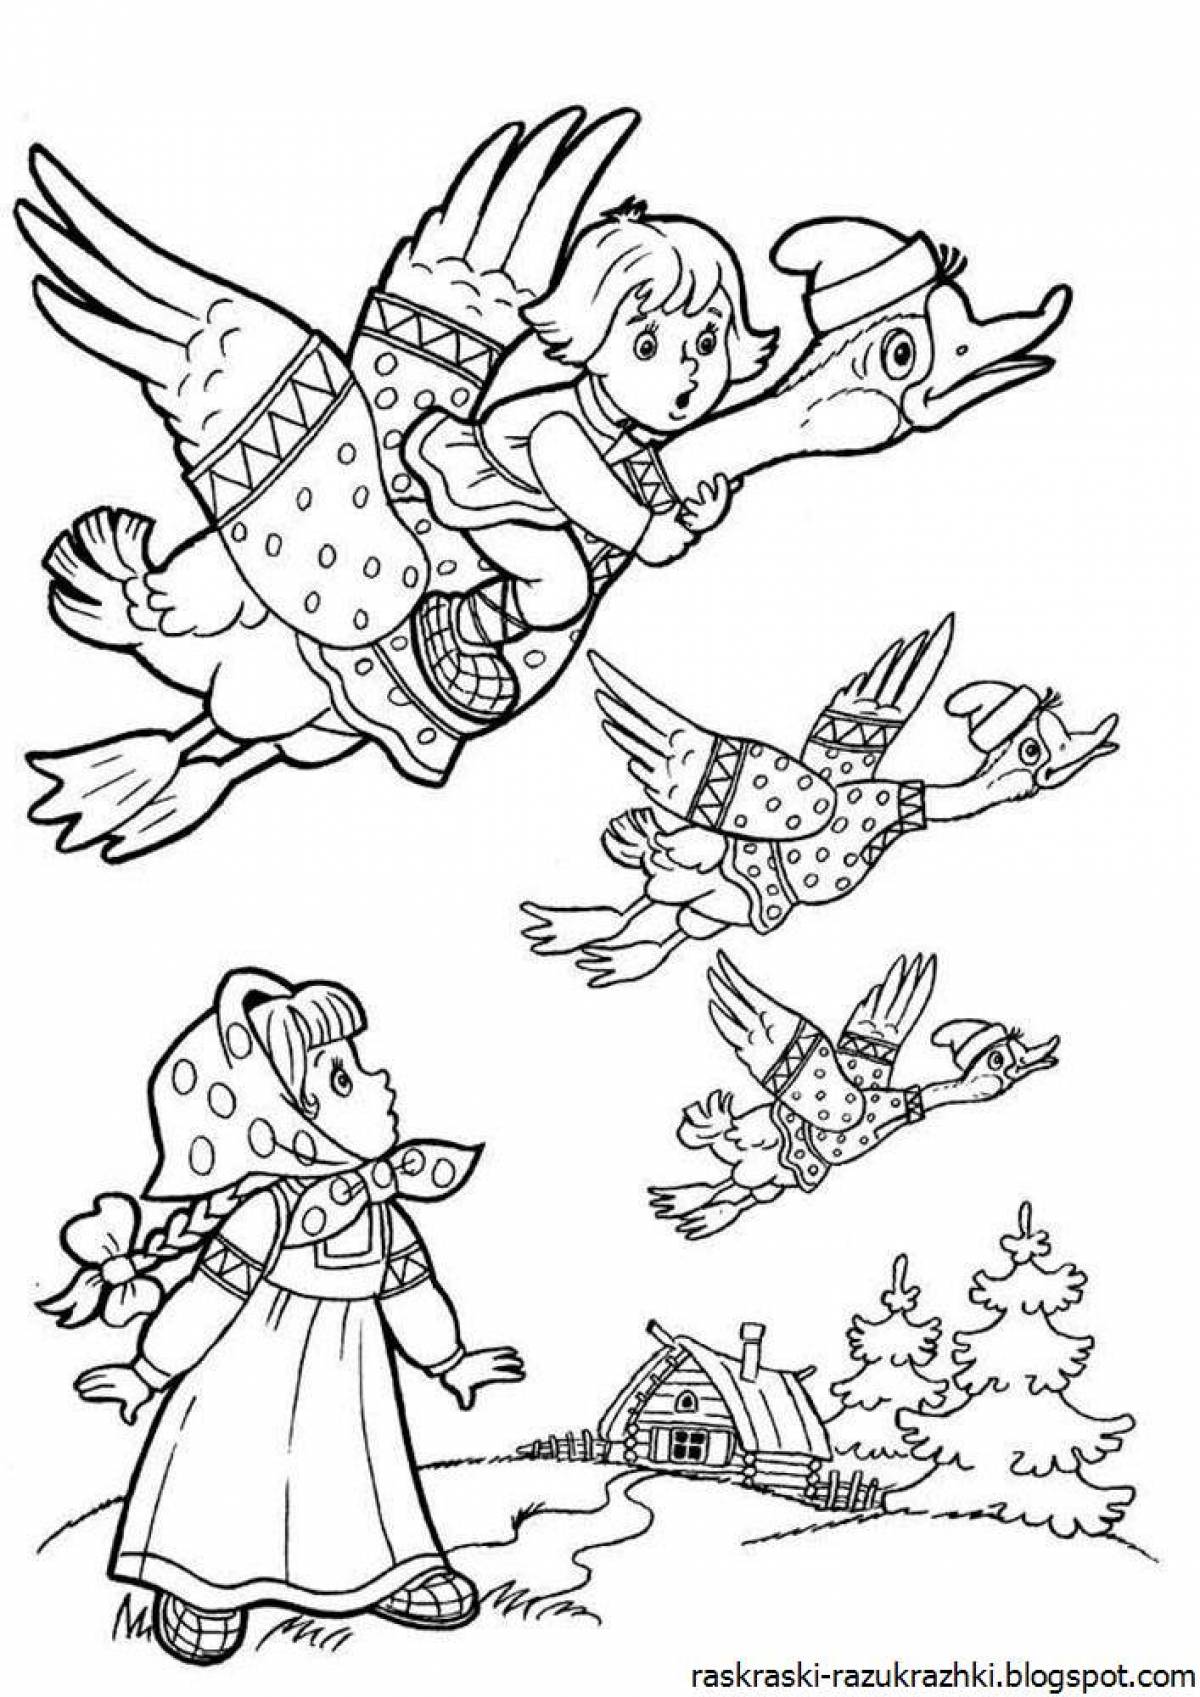 Coloring page cute russian folk tales